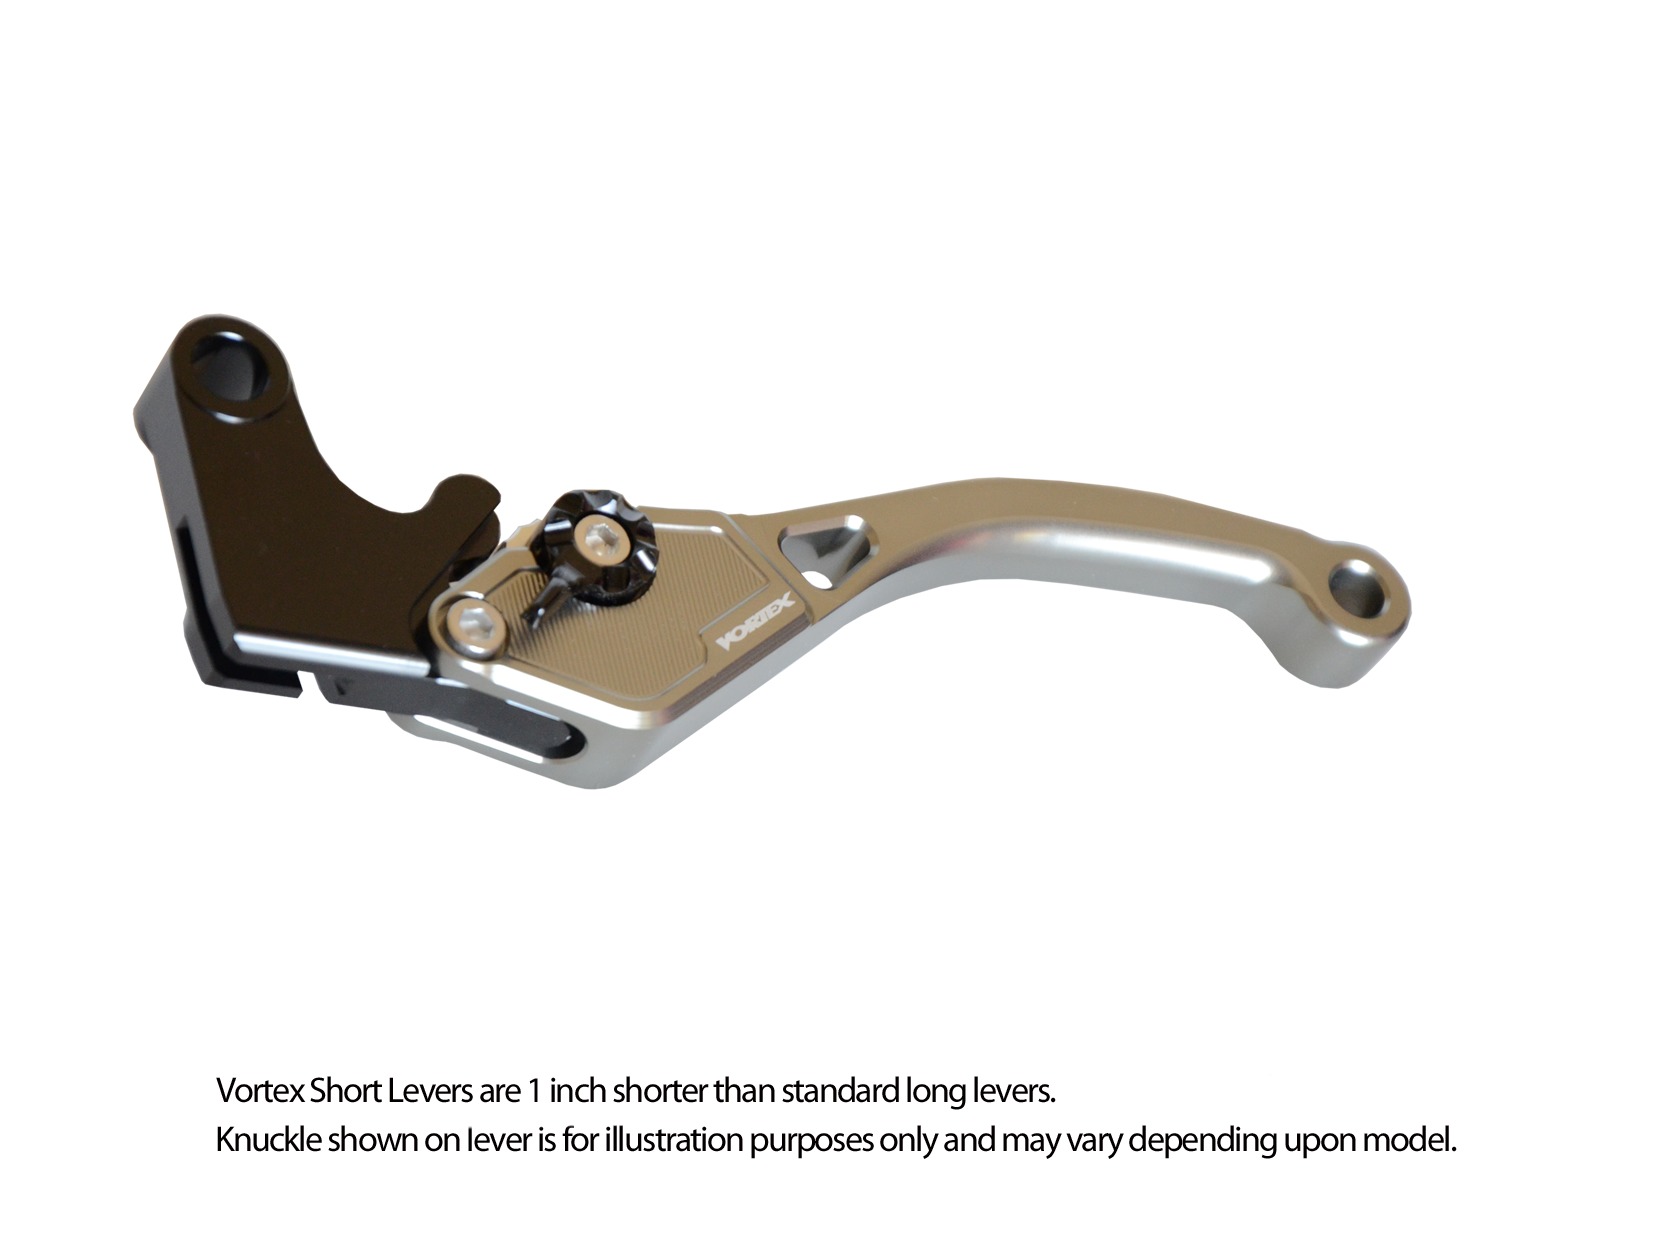 V3 2.0 TI-Silver Shorty Clutch Lever - For 98-09 GSX600F & SV650, 04-10 DL650 - Click Image to Close